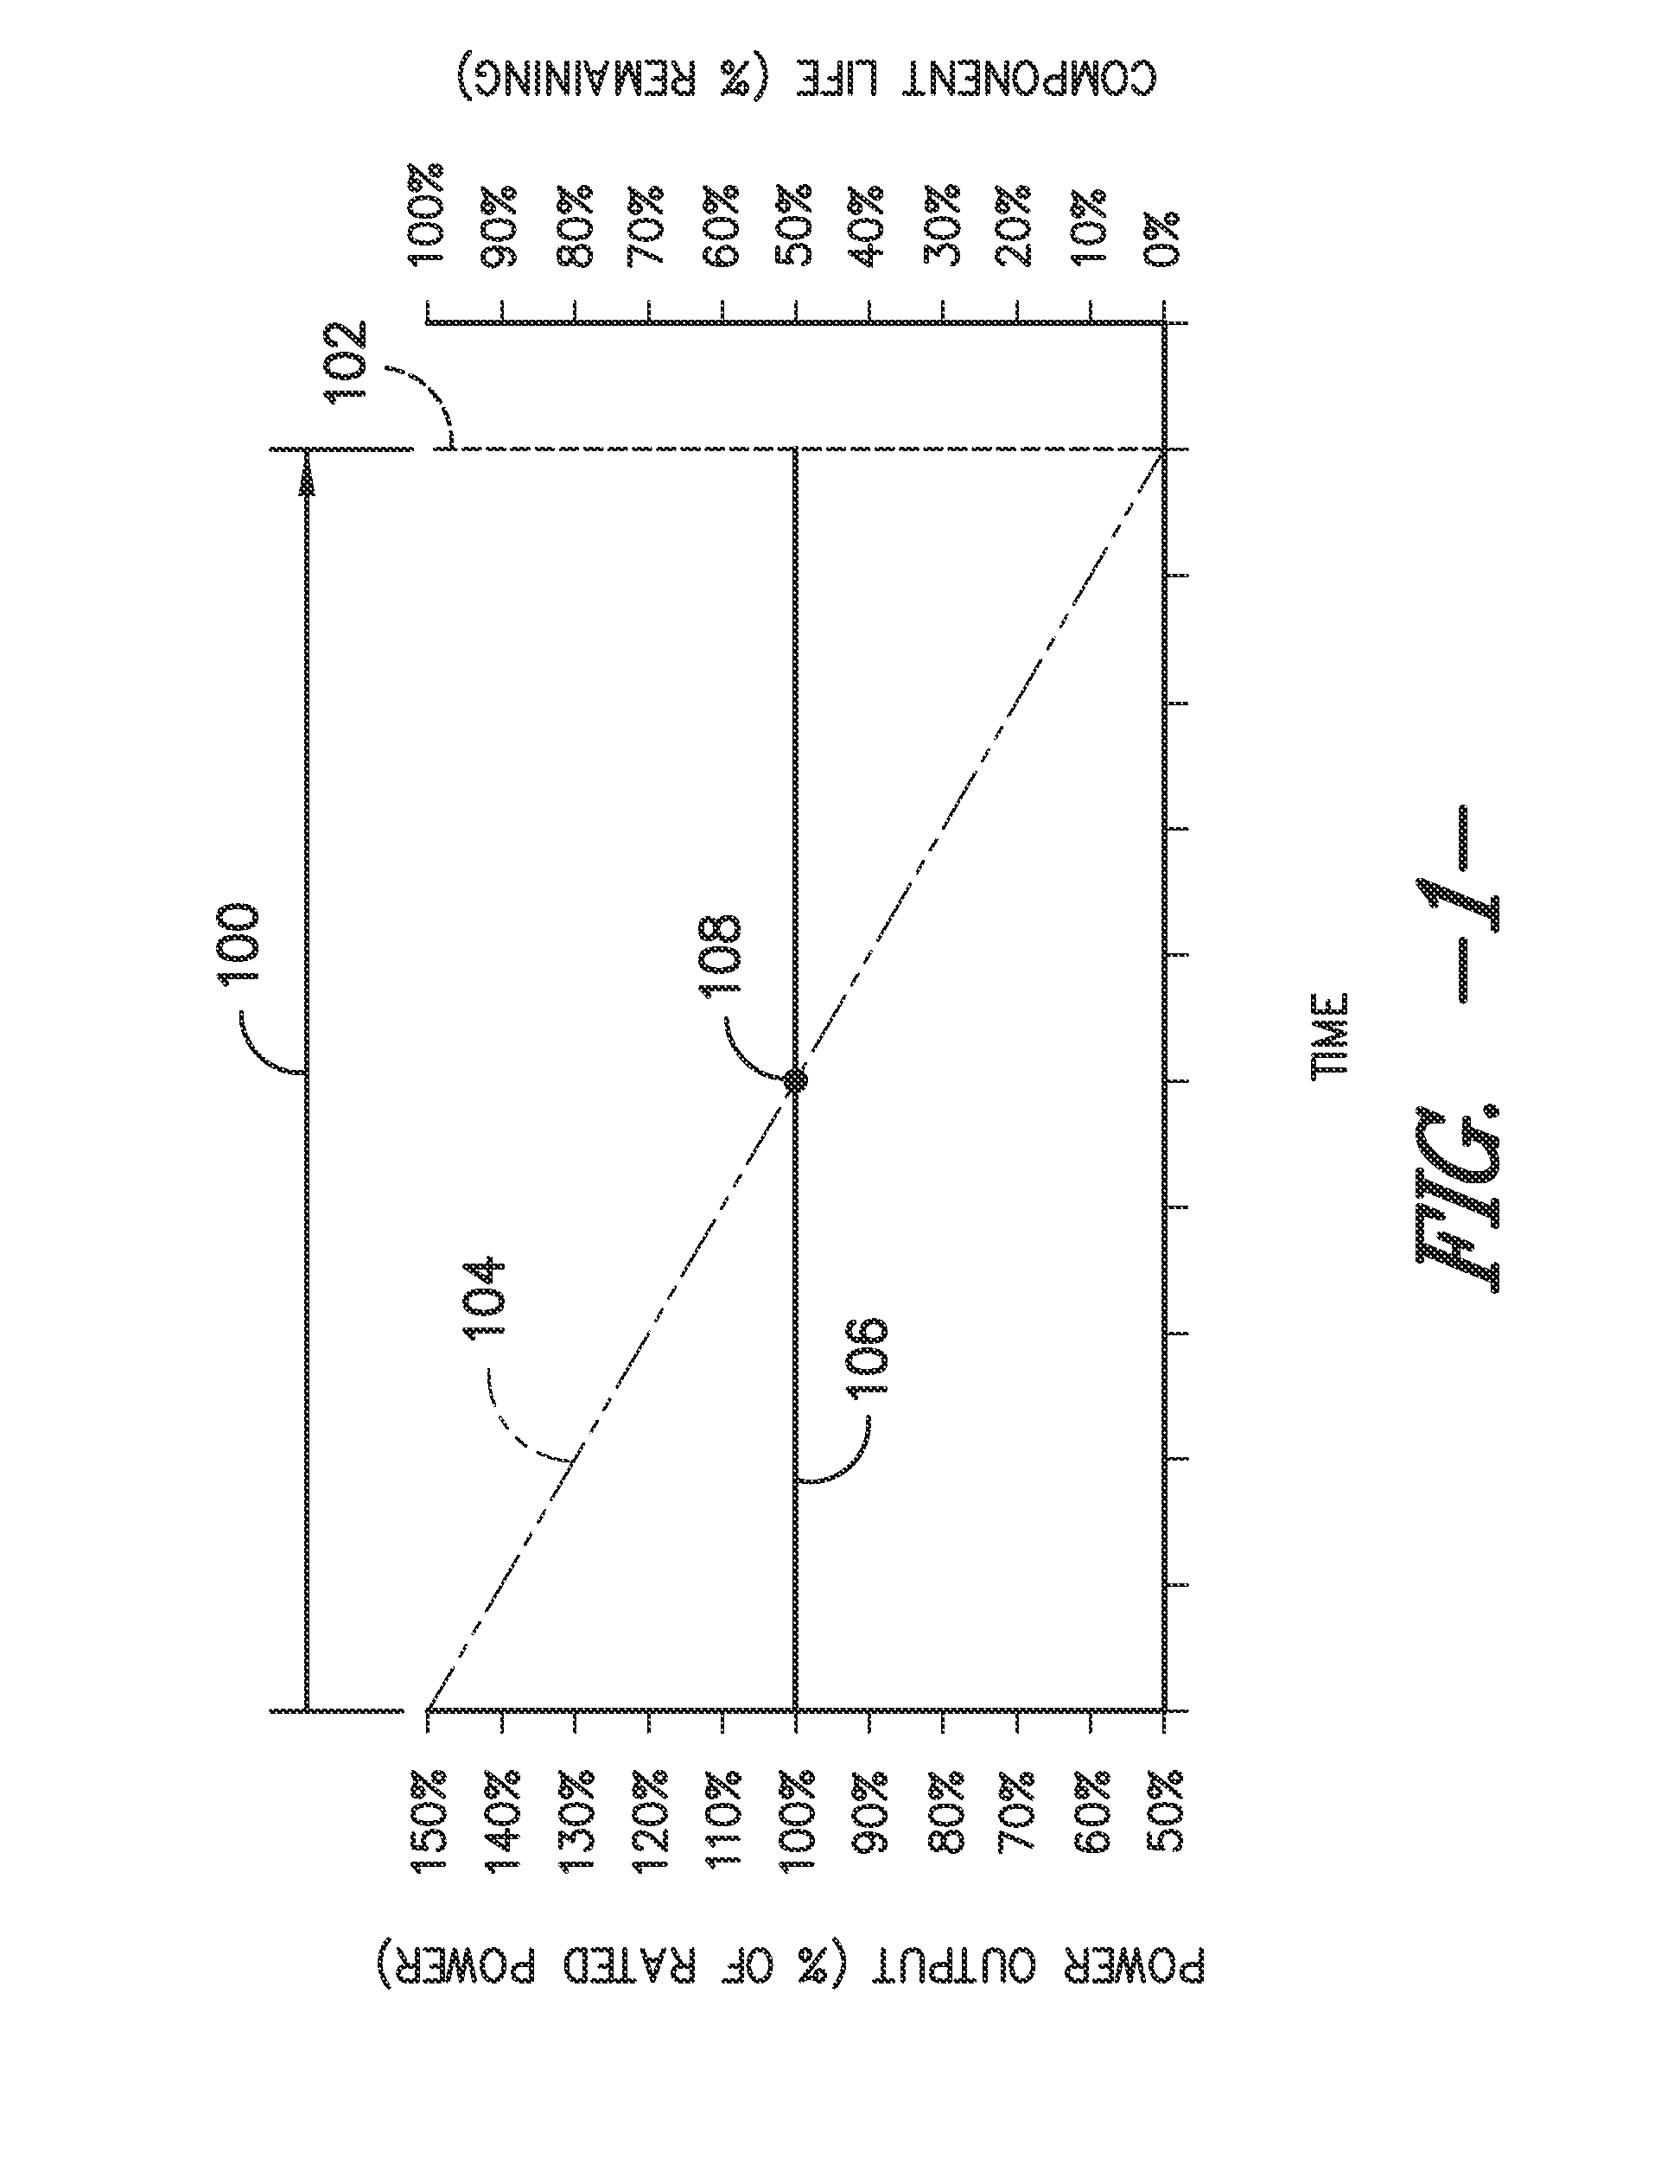 System and method for controlling a wind turbine